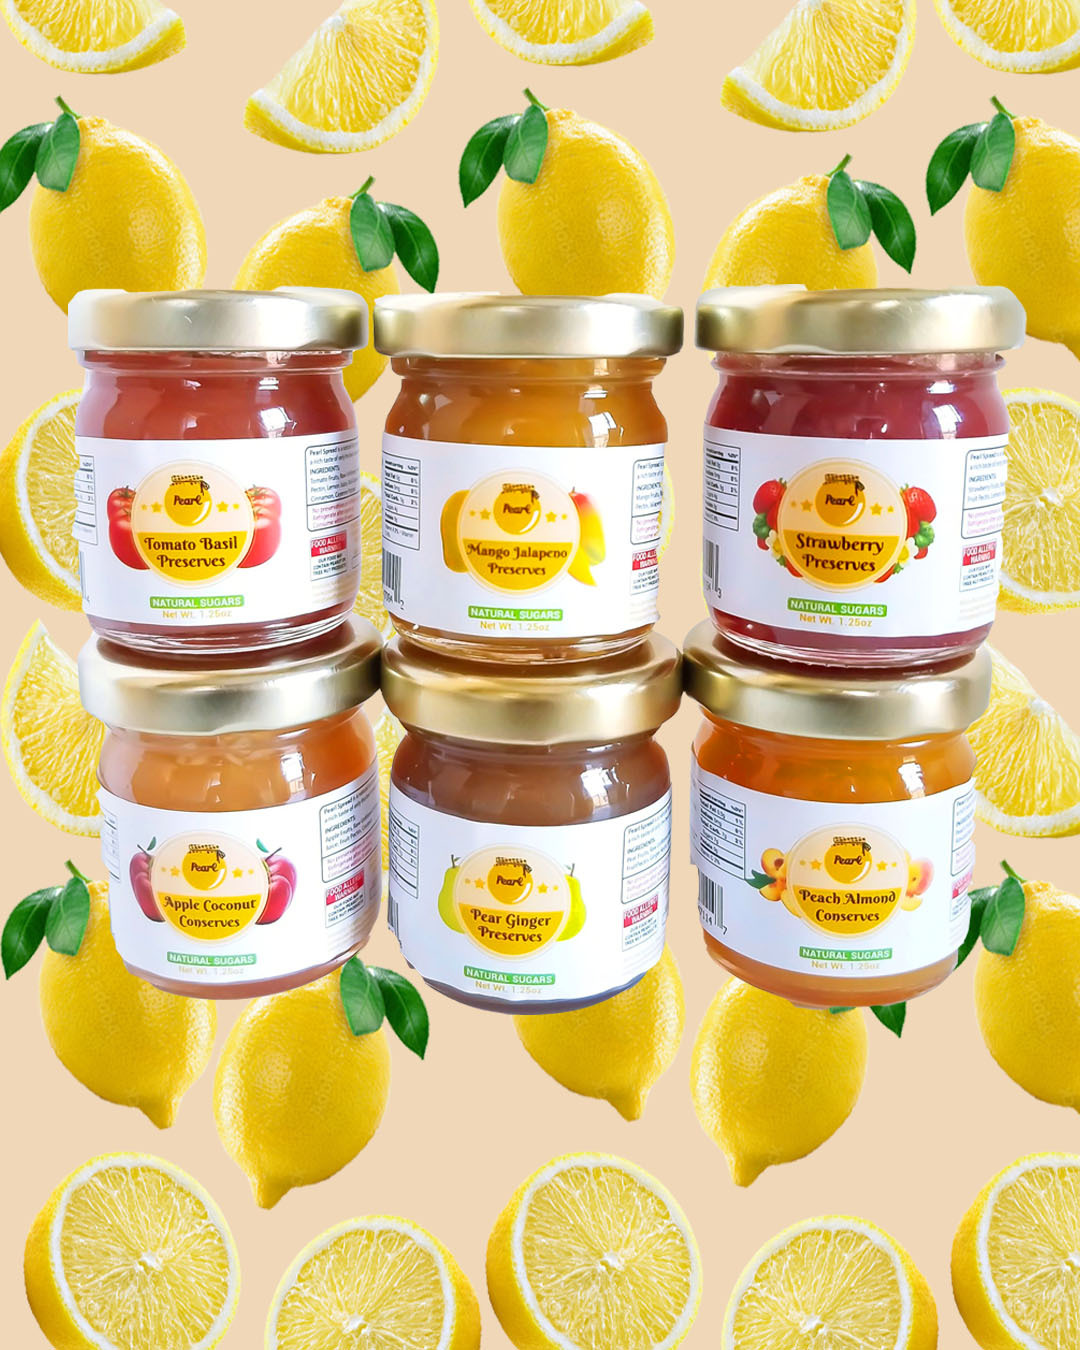 Pearl Honey Spreads - company that provides a healthy alternative to “sugar spreads”